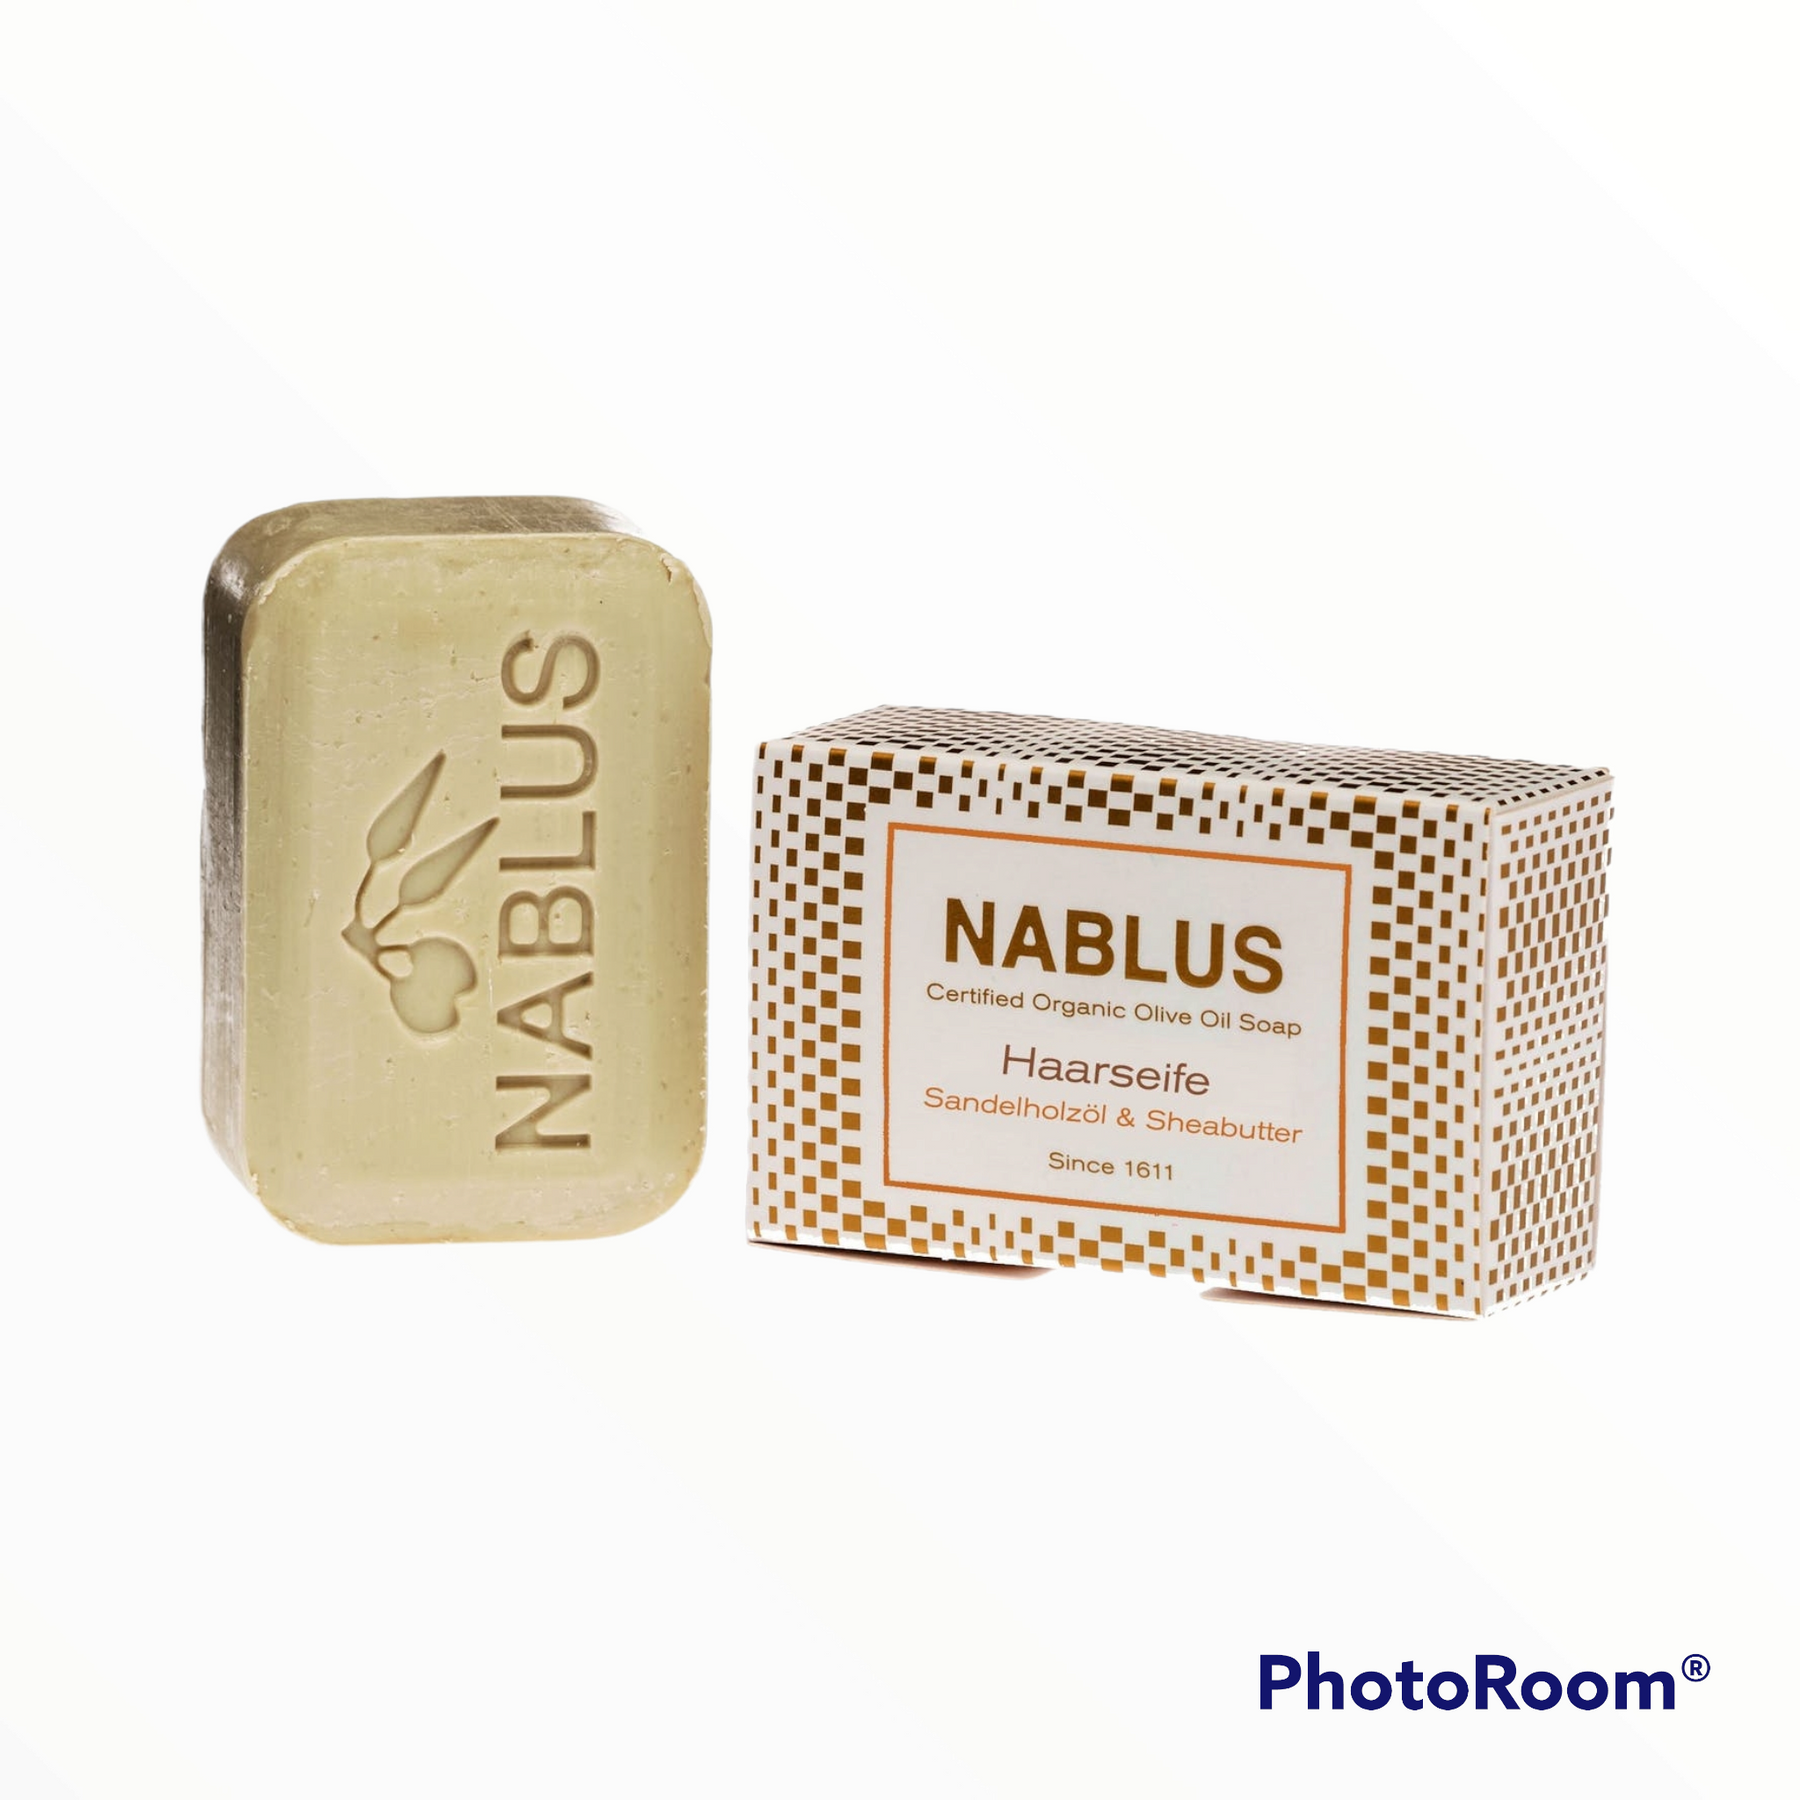 NABLUS SOAP hair soap, sandalwood oil &amp; shea butter, certified organic olive oil soap for hair, also ideal as beard soap, PALM OIL-FREE, perfume-free, 100g